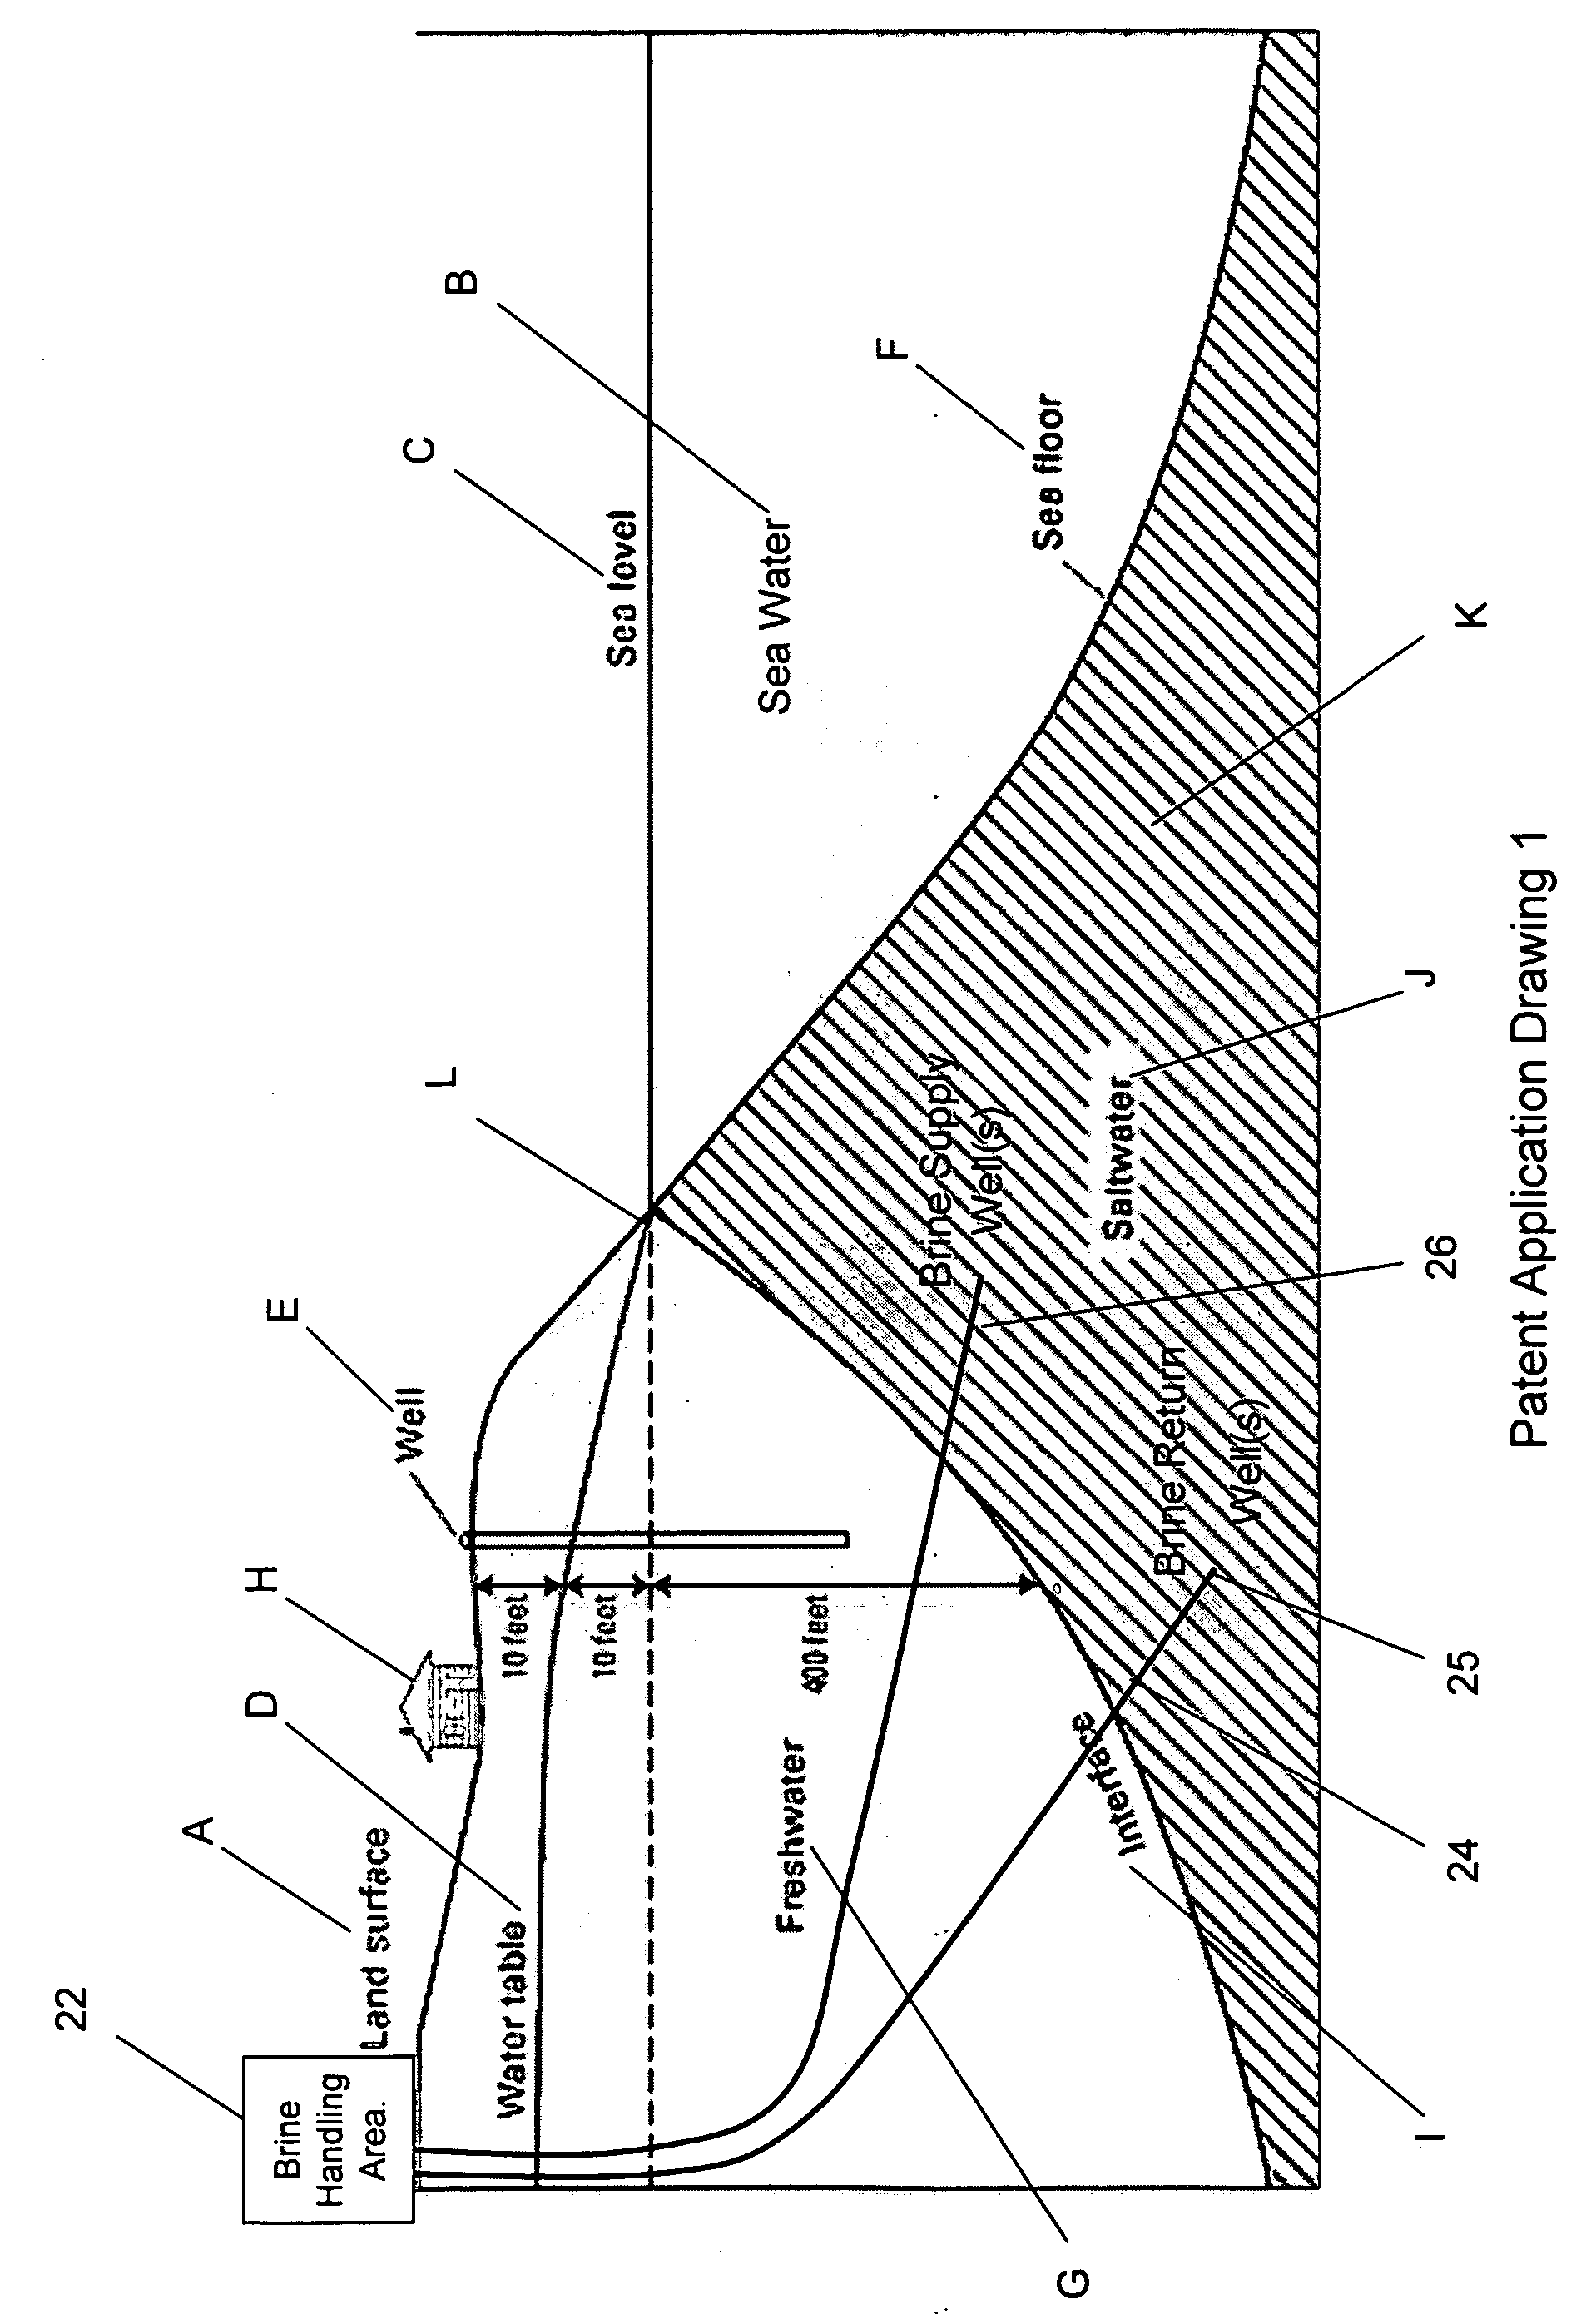 Method and apparatus for desalinating water combined with power generation